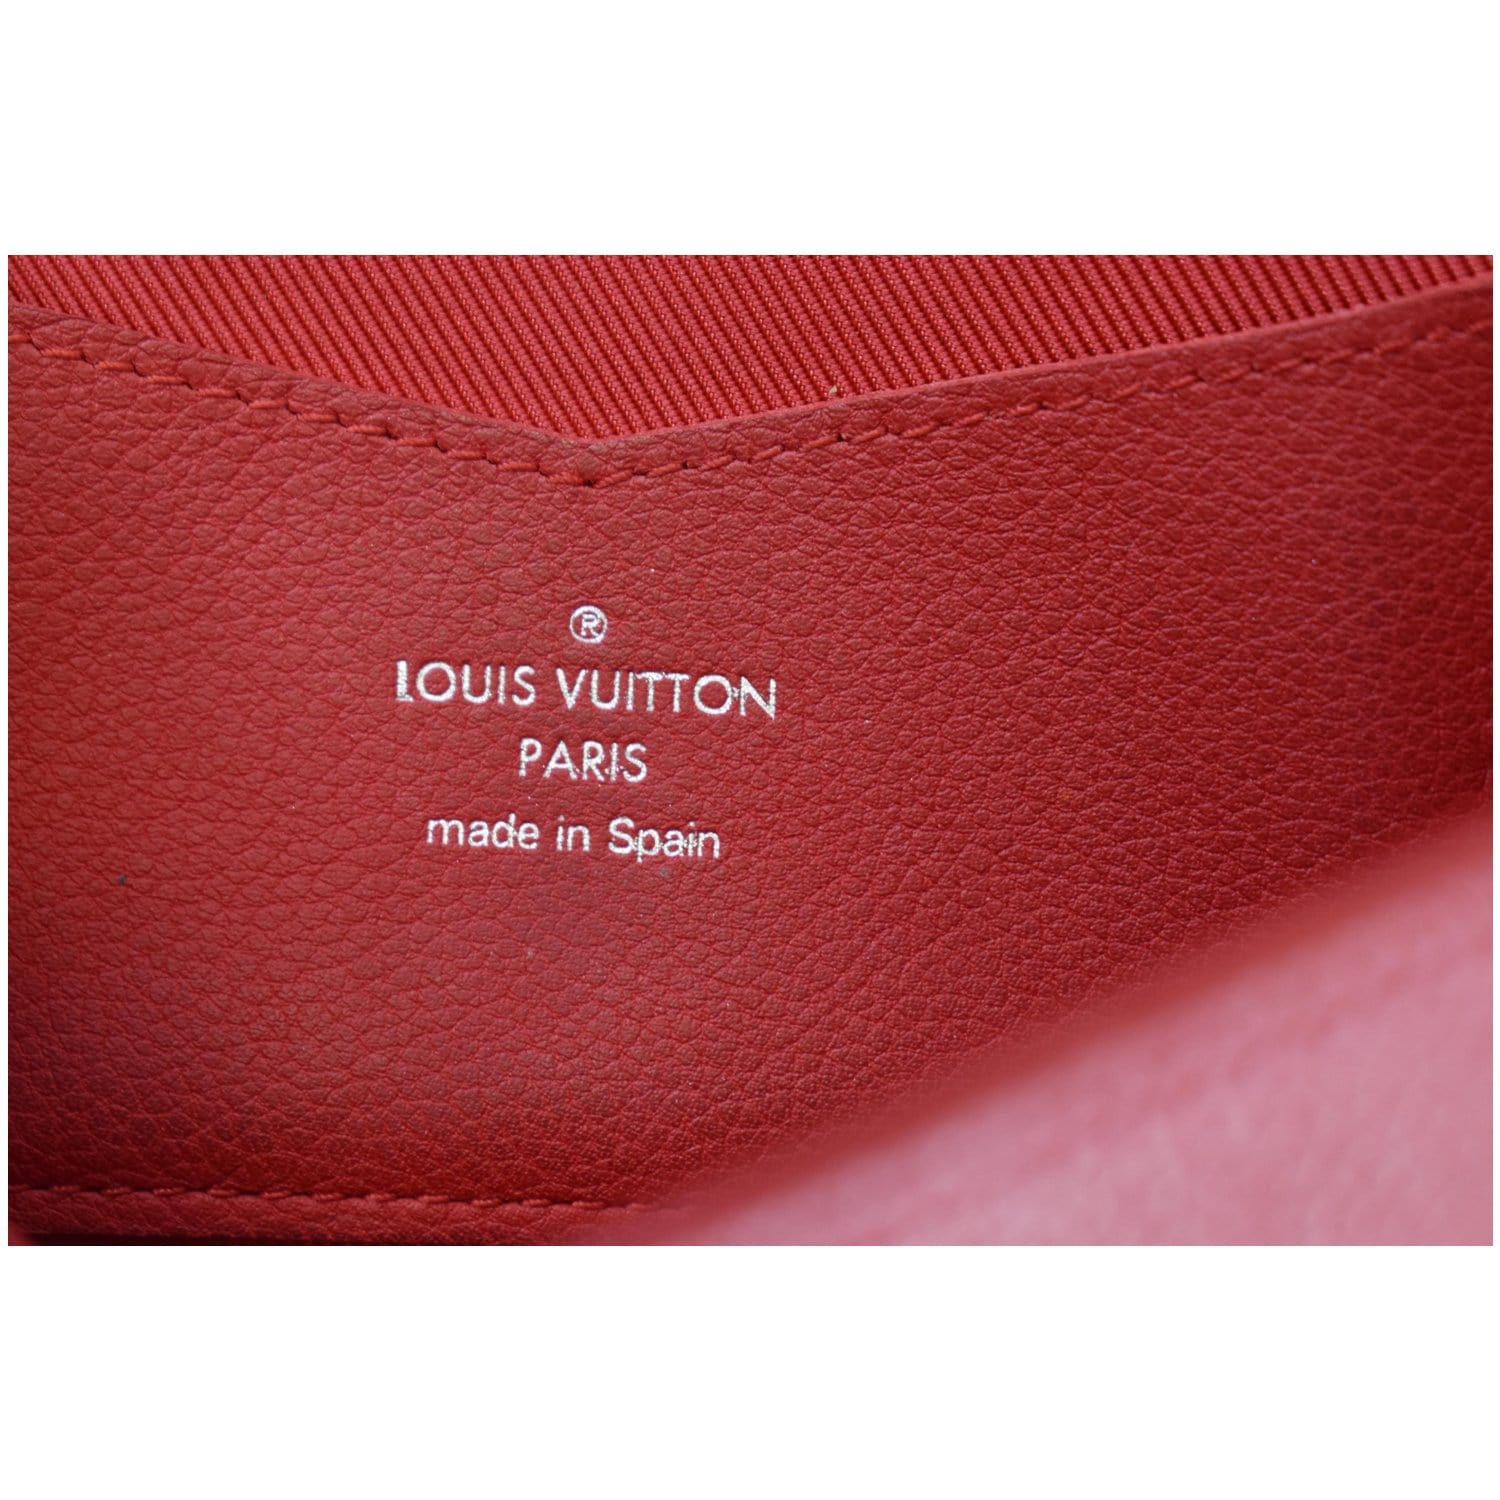 louis vuitton made in